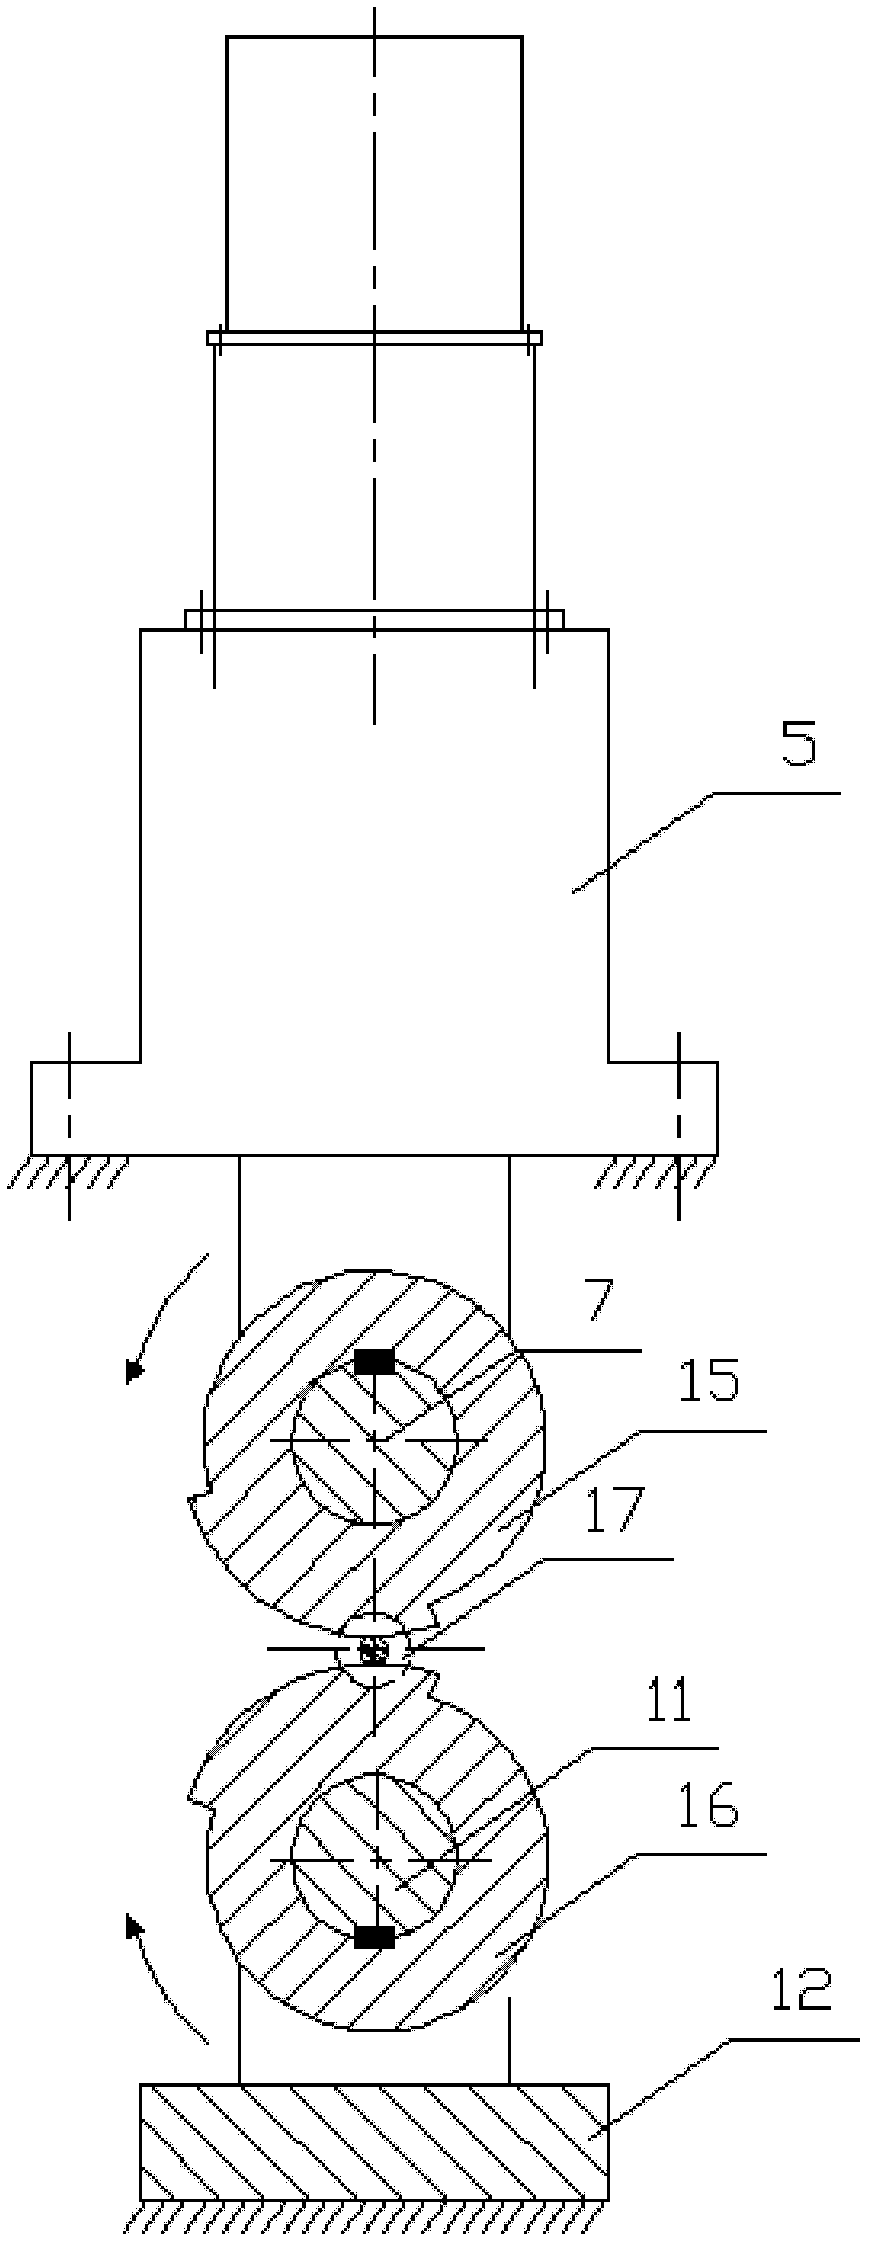 Alternating-current direct-drive servo device for main transmission and two-roller radial spacing adjustment